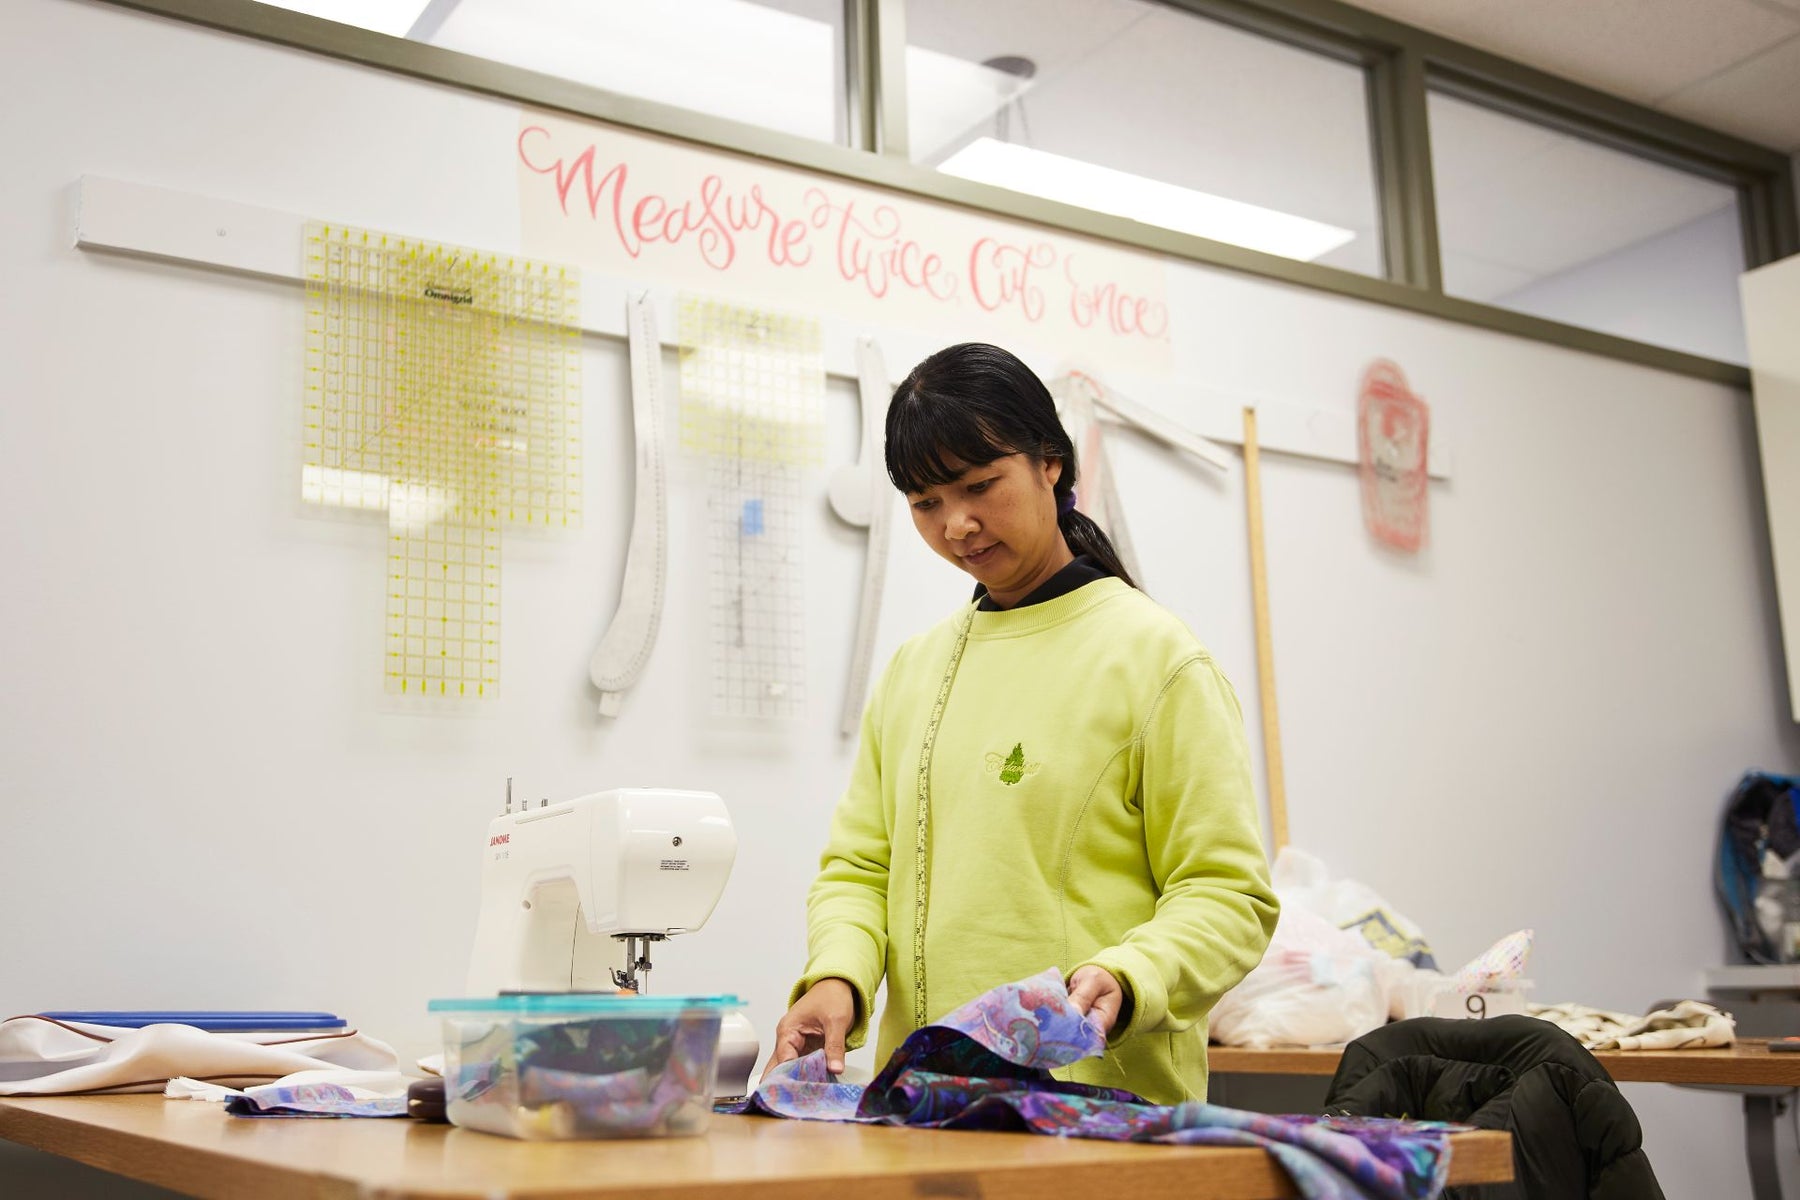 Award-winning Sewing for Jobs Program. Help newcomer women make a difference in their community. Women using upcycled fabric to give life to new products. Cause-driven charity in Ottawa, Canada.